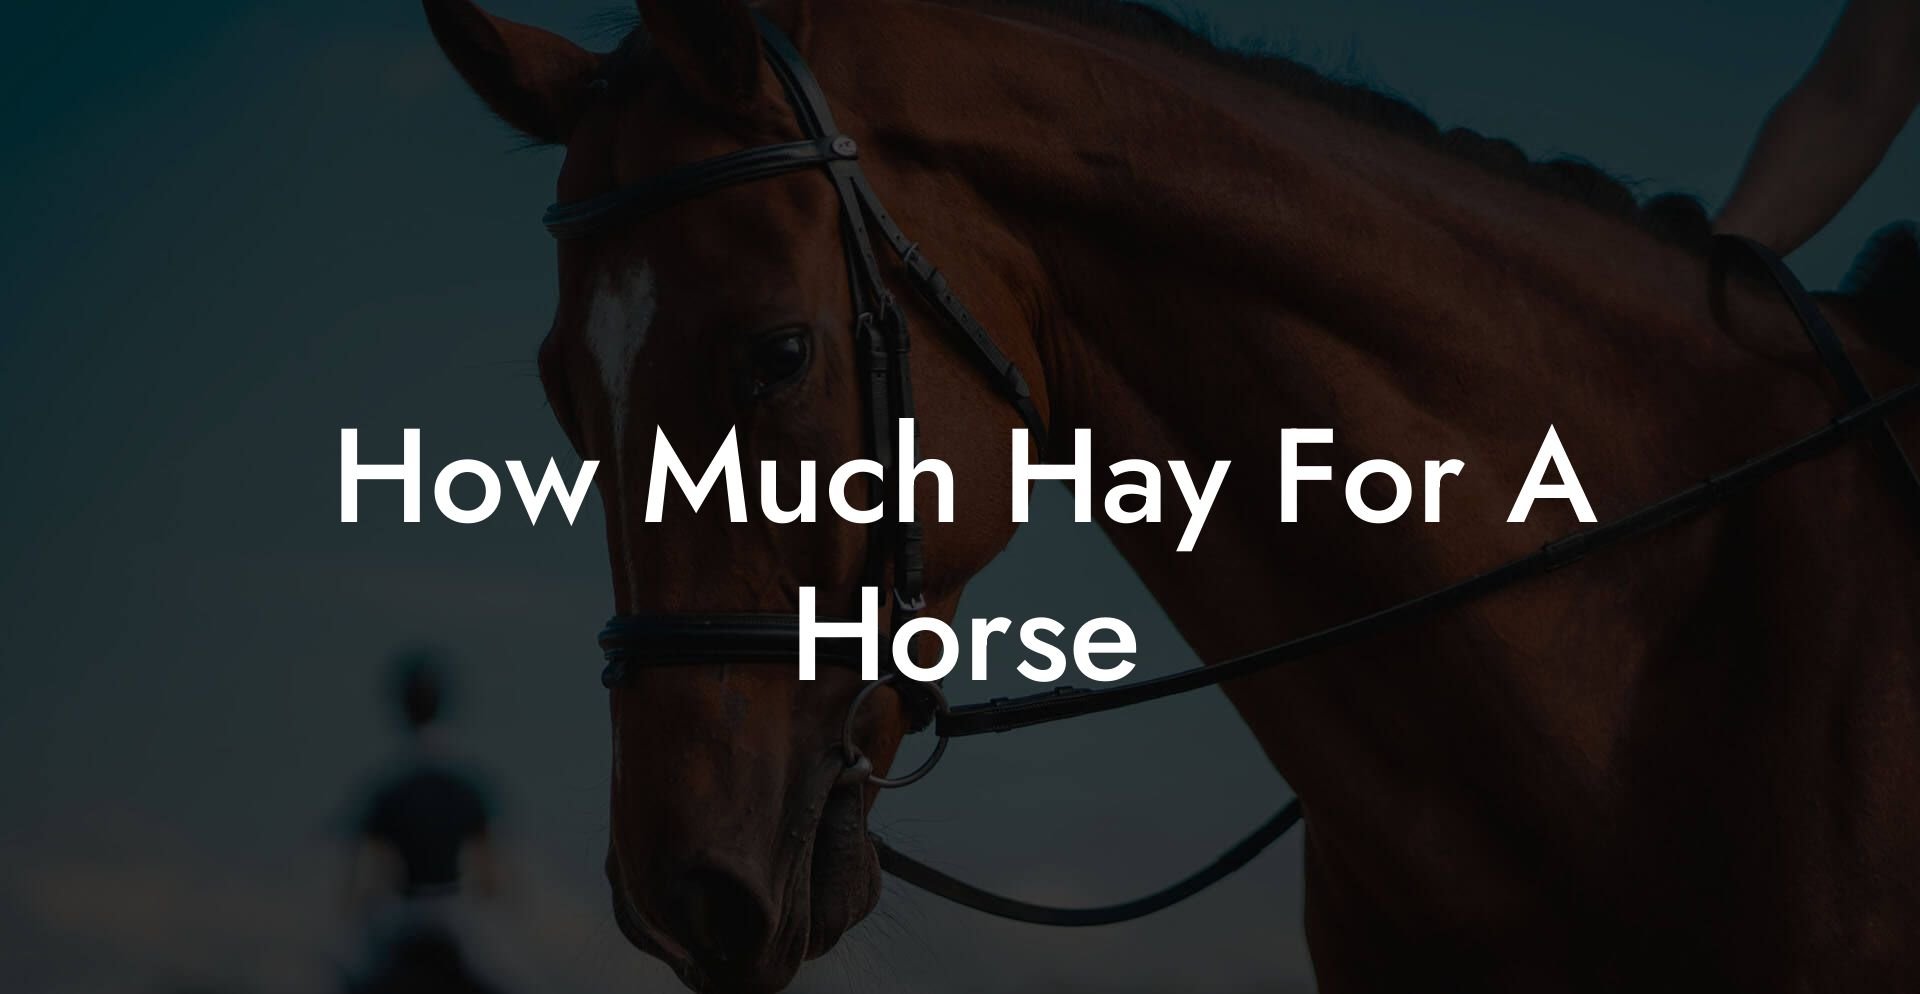 How Much Hay For A Horse